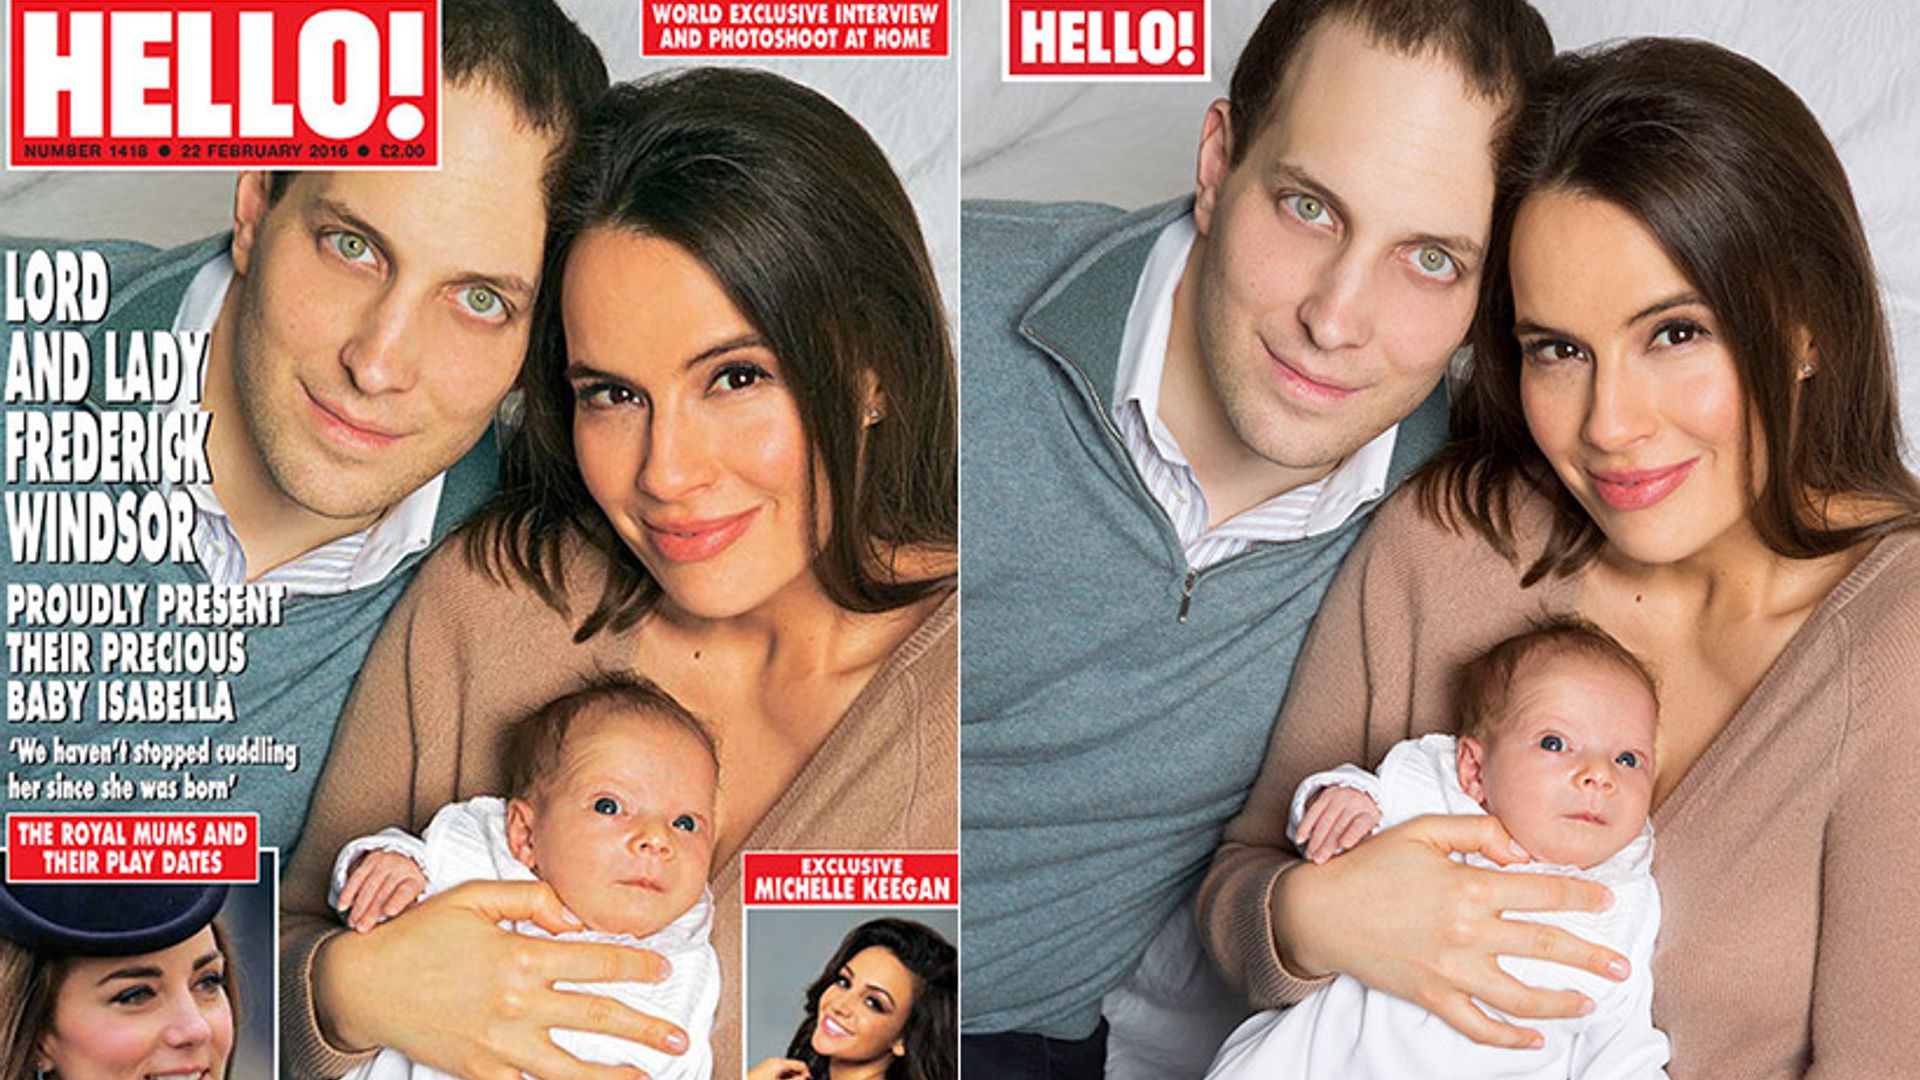 Lord Frederick Windsor and actress Sophie Winkleman introduce their daughter Isabella in HELLO! exclusive